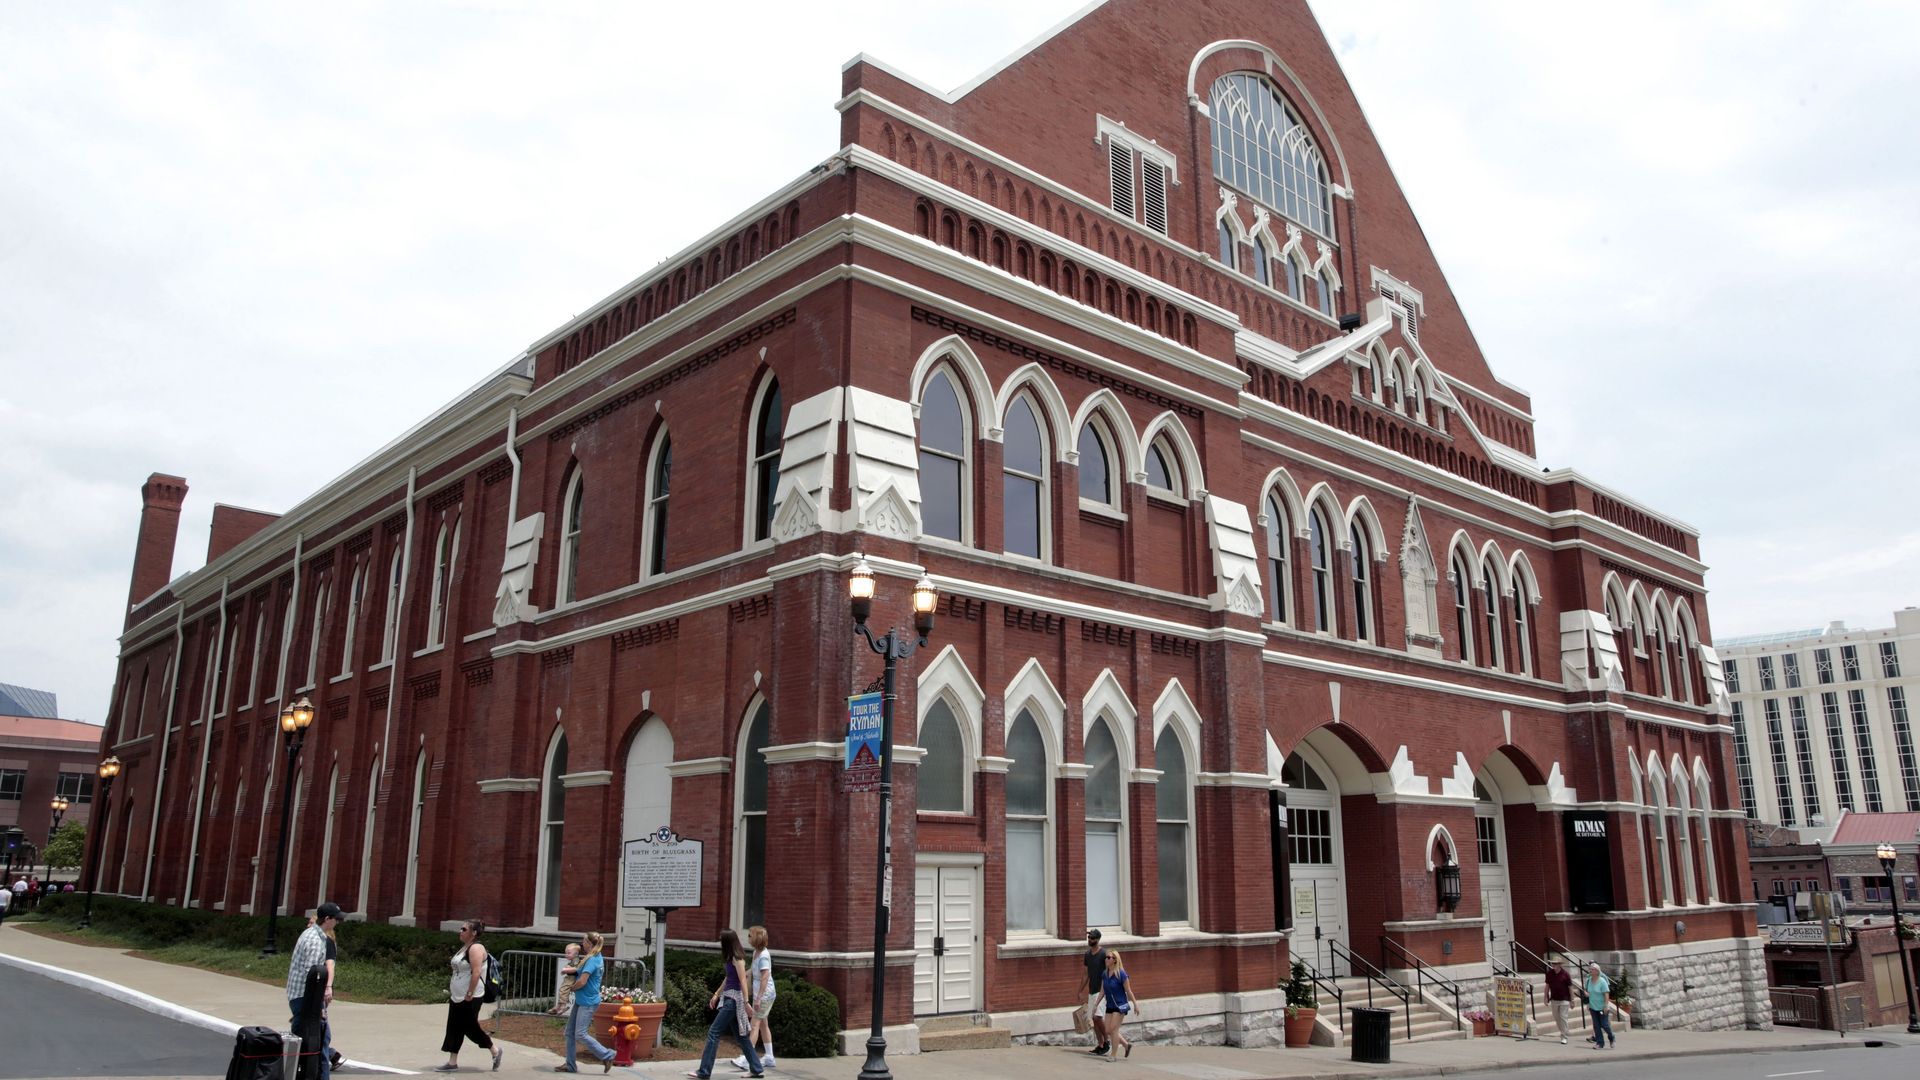 Exterior of the ryman auditorium with pedestrians walking by